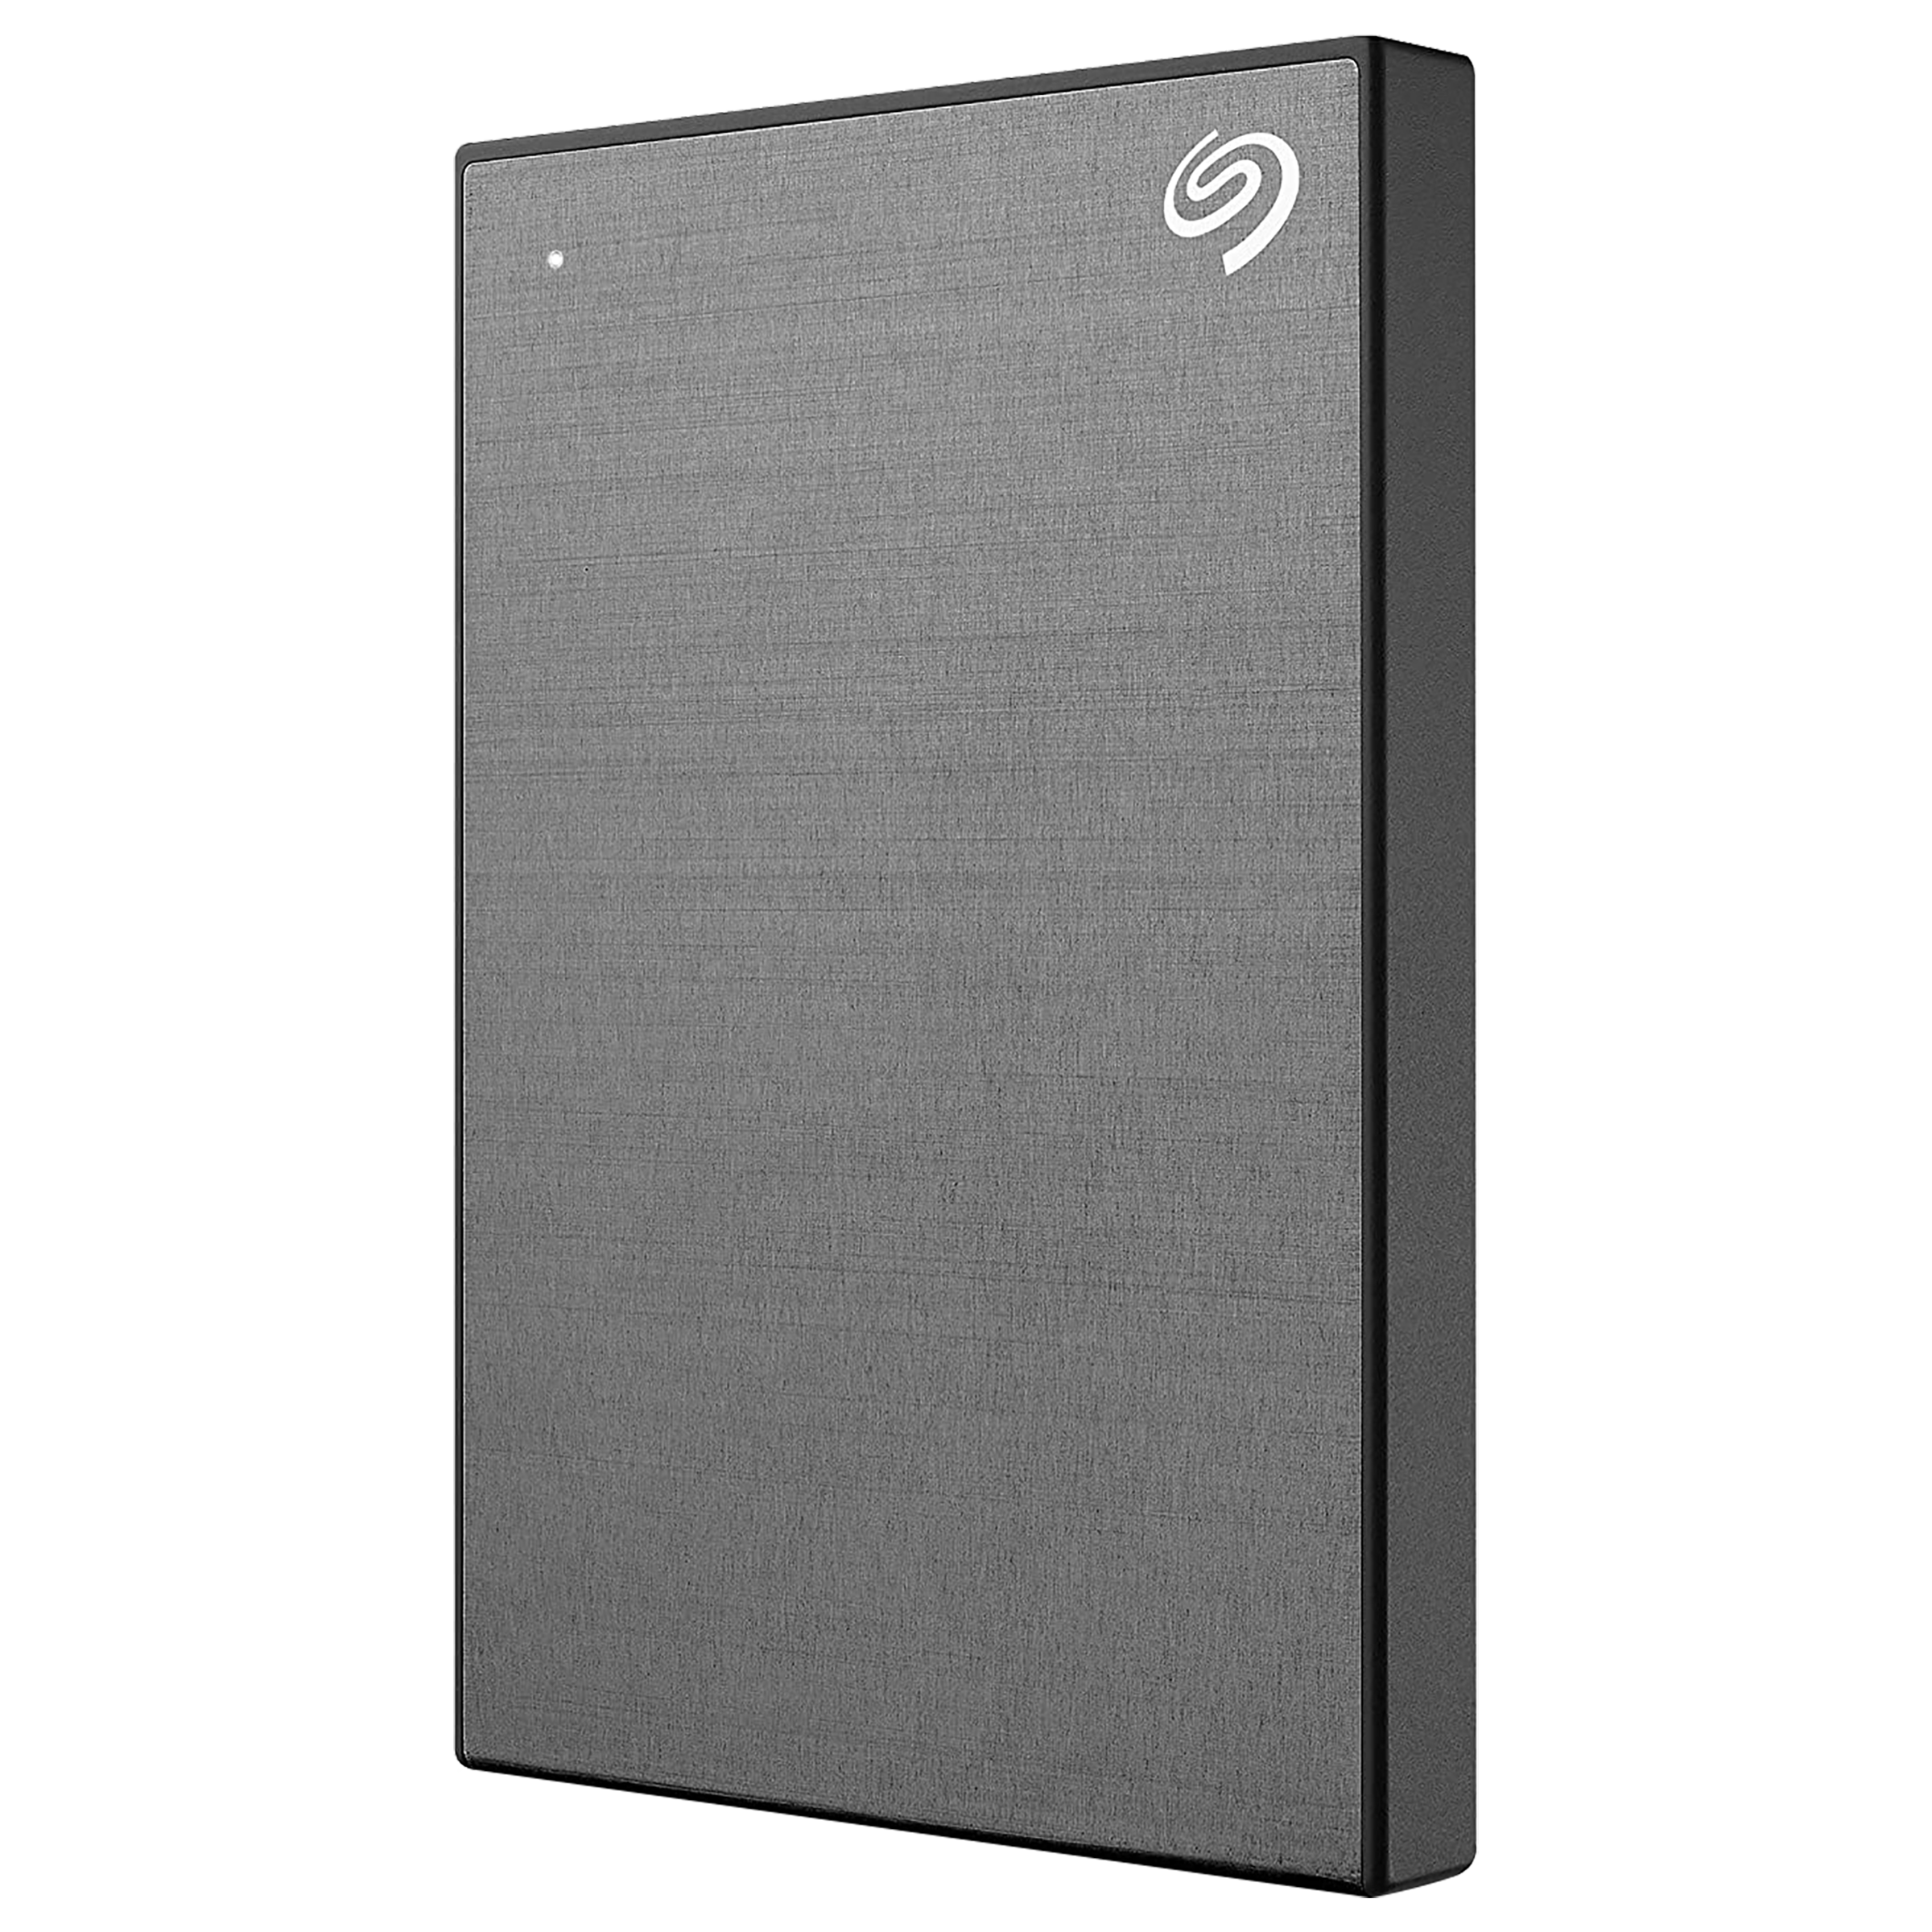 Seagate One Touch 1TB USB 3.0 Hard Disk Drive (Password Activated Hardware Encryption, STKY1000404, Grey)